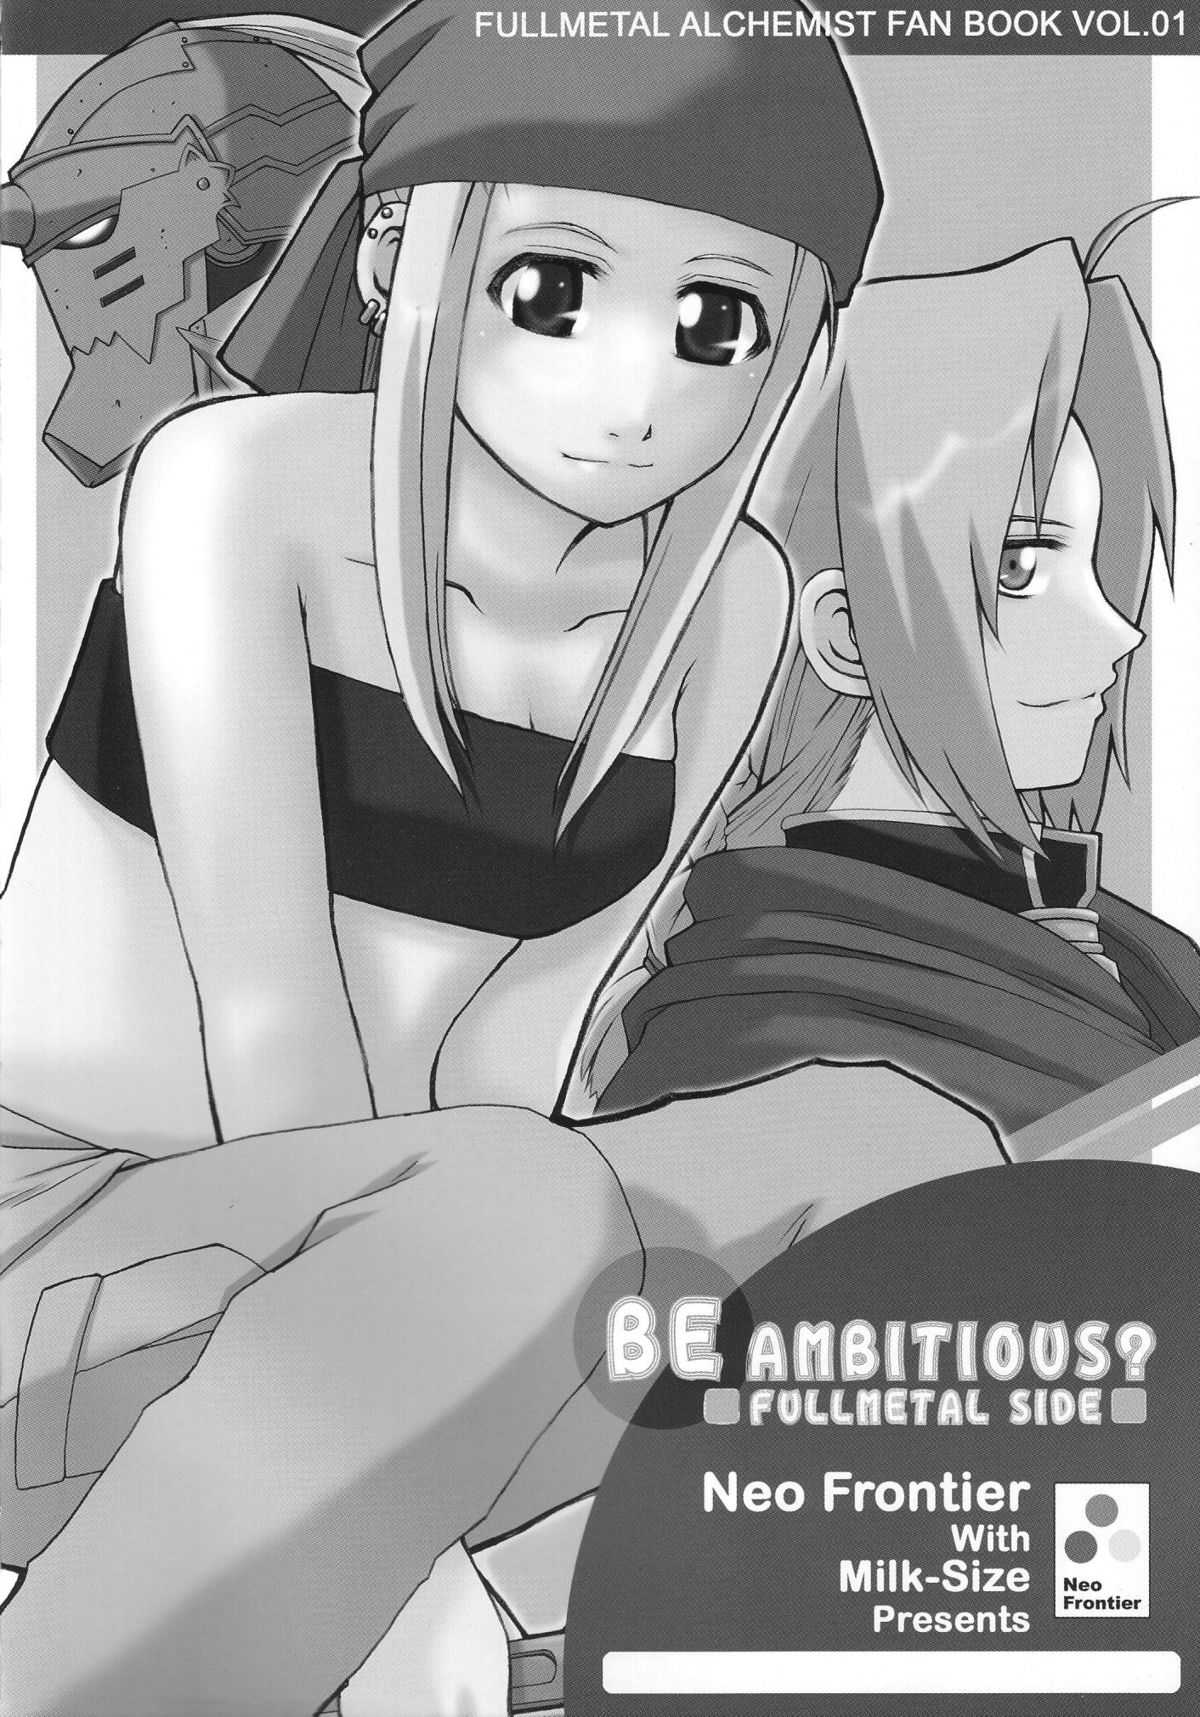 [Neo Frontier with MILK-SIZE] Be Ambitious (Full Metal Alchemist) 